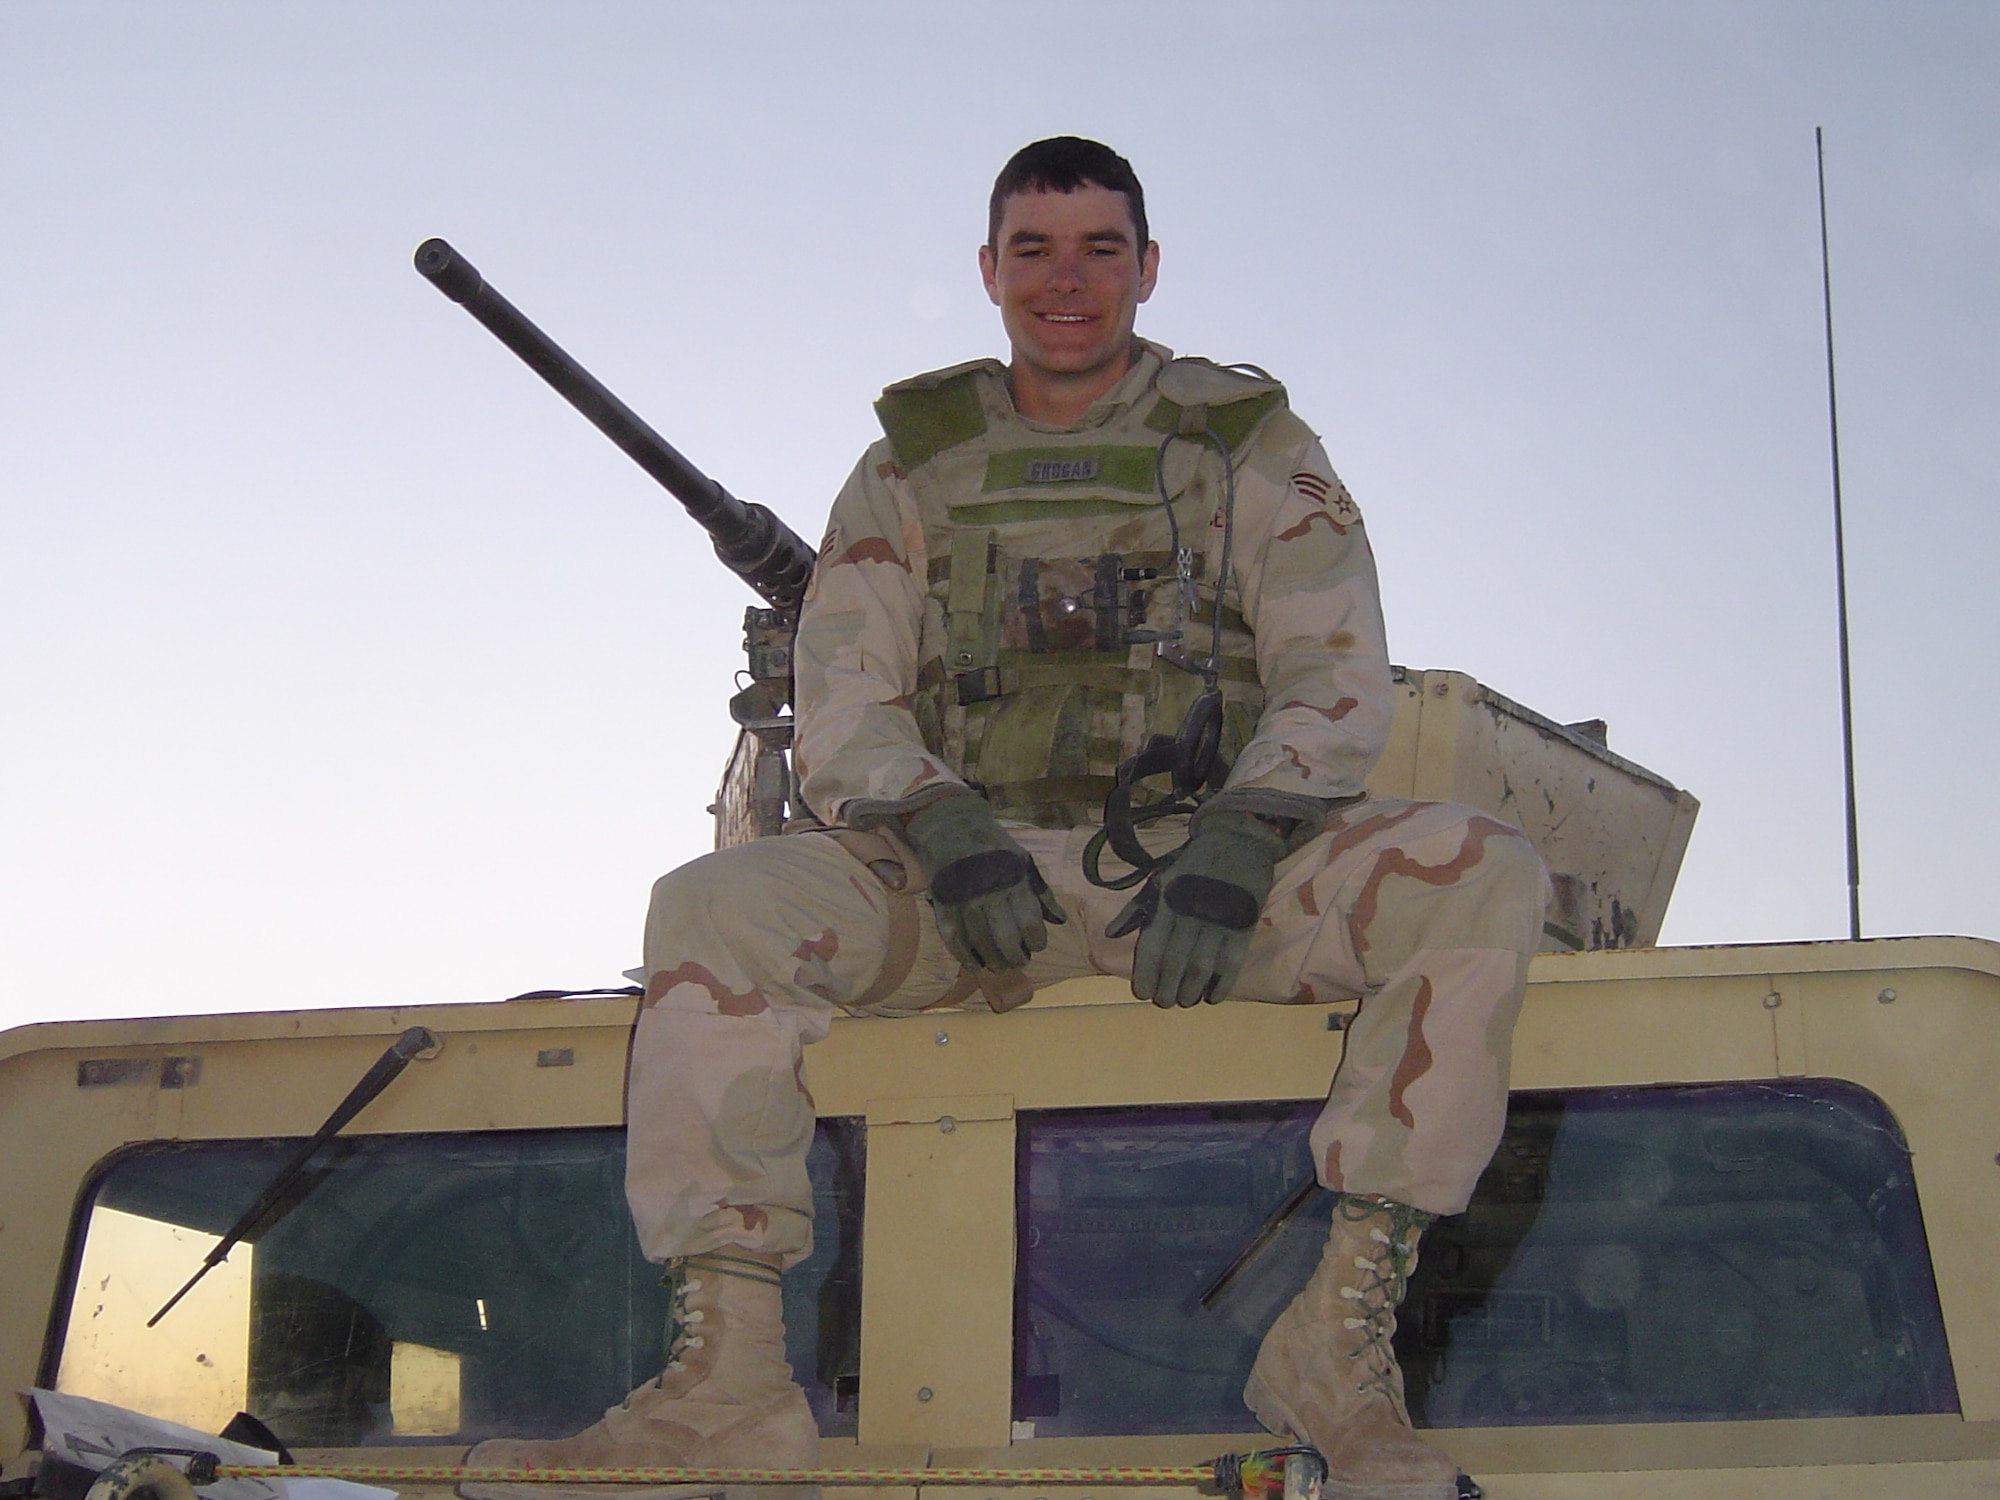 Tech. Sgt. Kellen Grogan, then a senior Airman, sits on a Humvee in Iraq March 21, 2005, just two days after suffering a concussion from an improvised explosive device detonating underneath his vehicle. (courtesy photo)